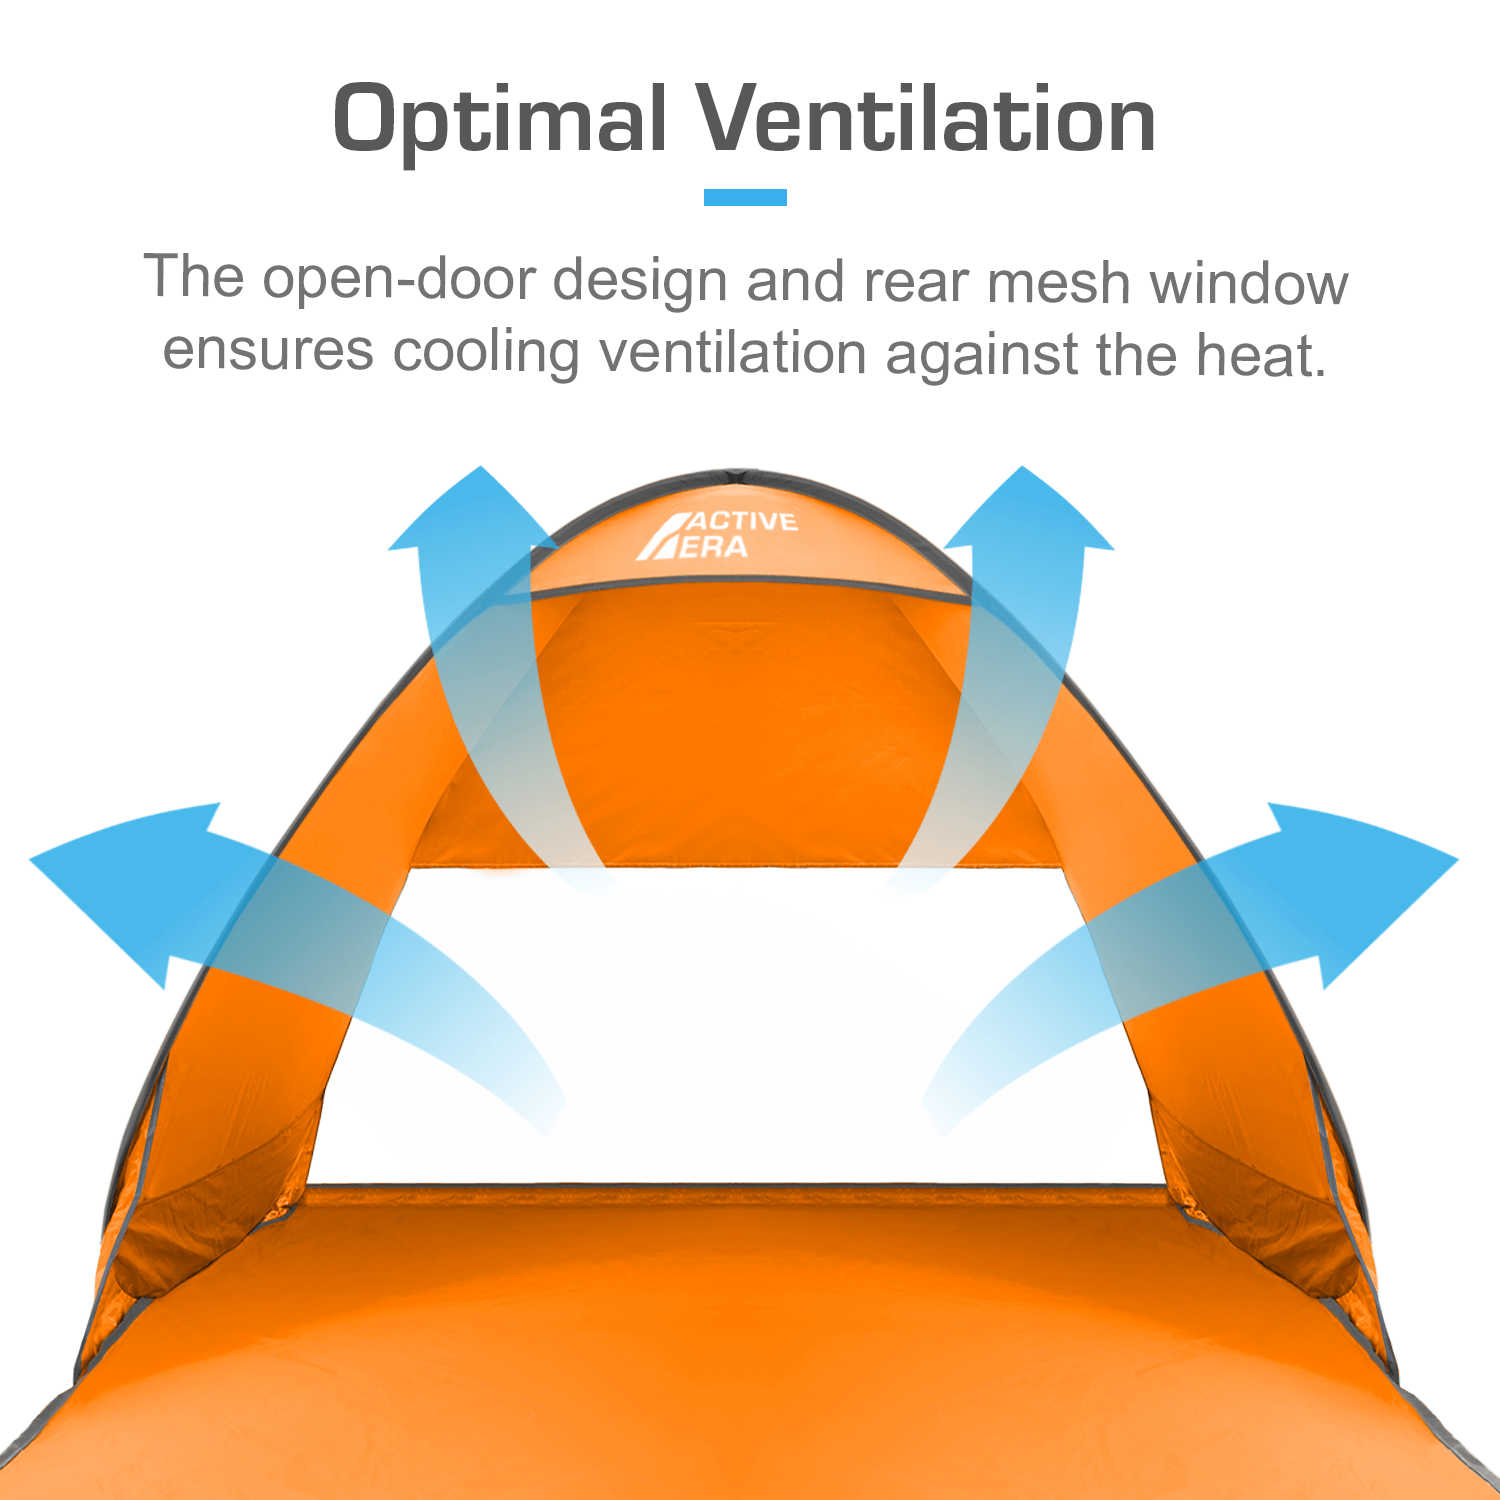 2 Person Beach Tent with UV Protection - Orange